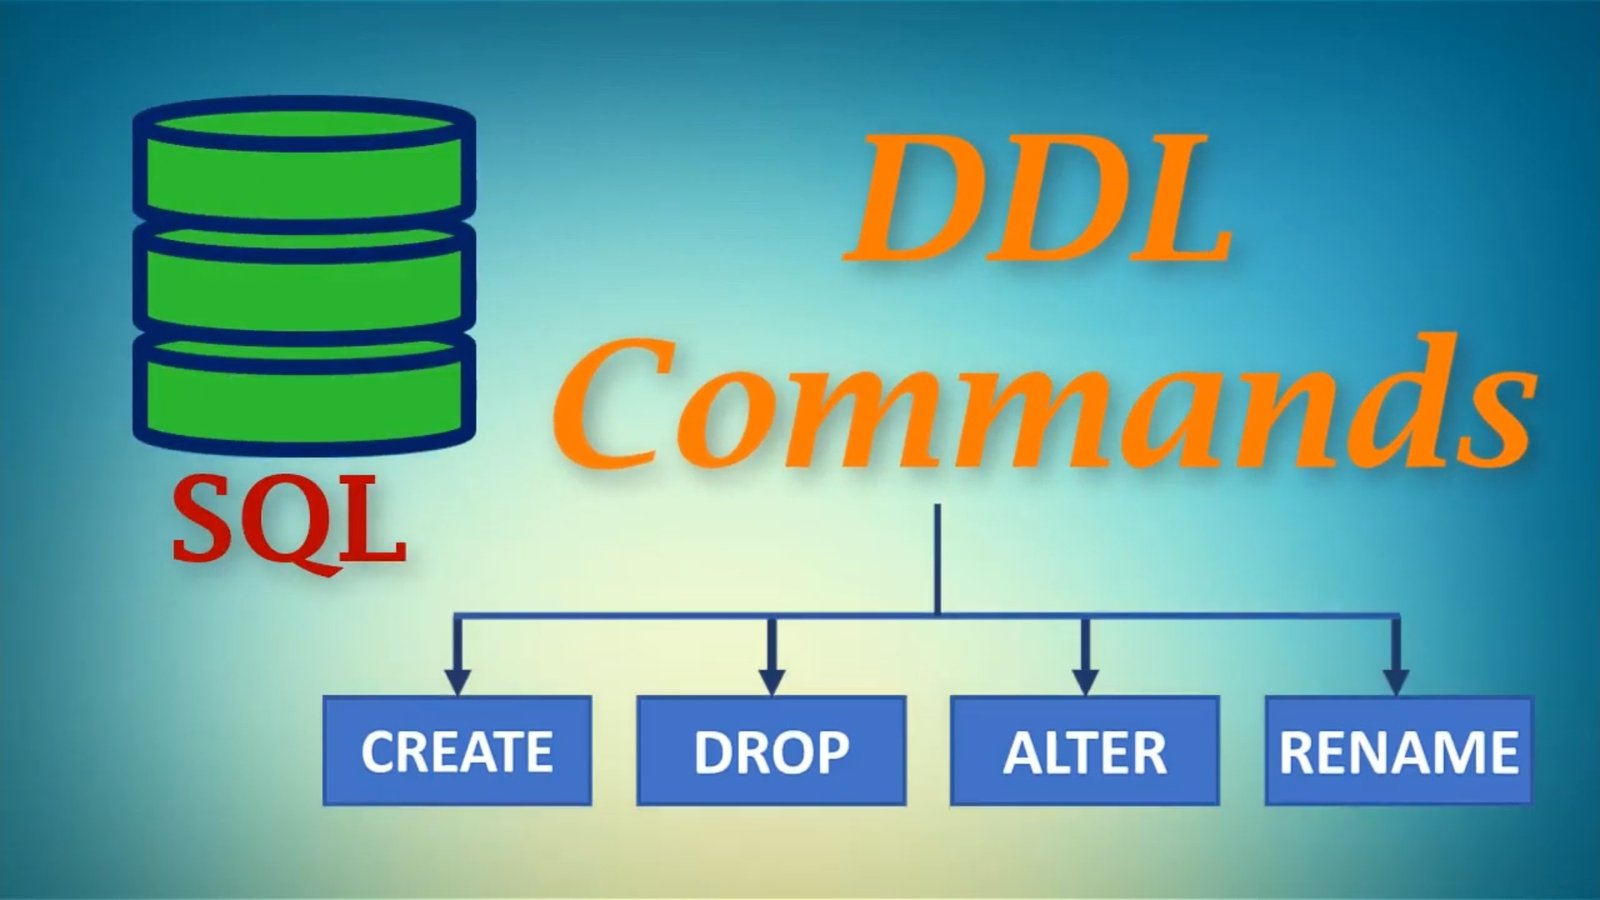 DDL Commands Simply Coding